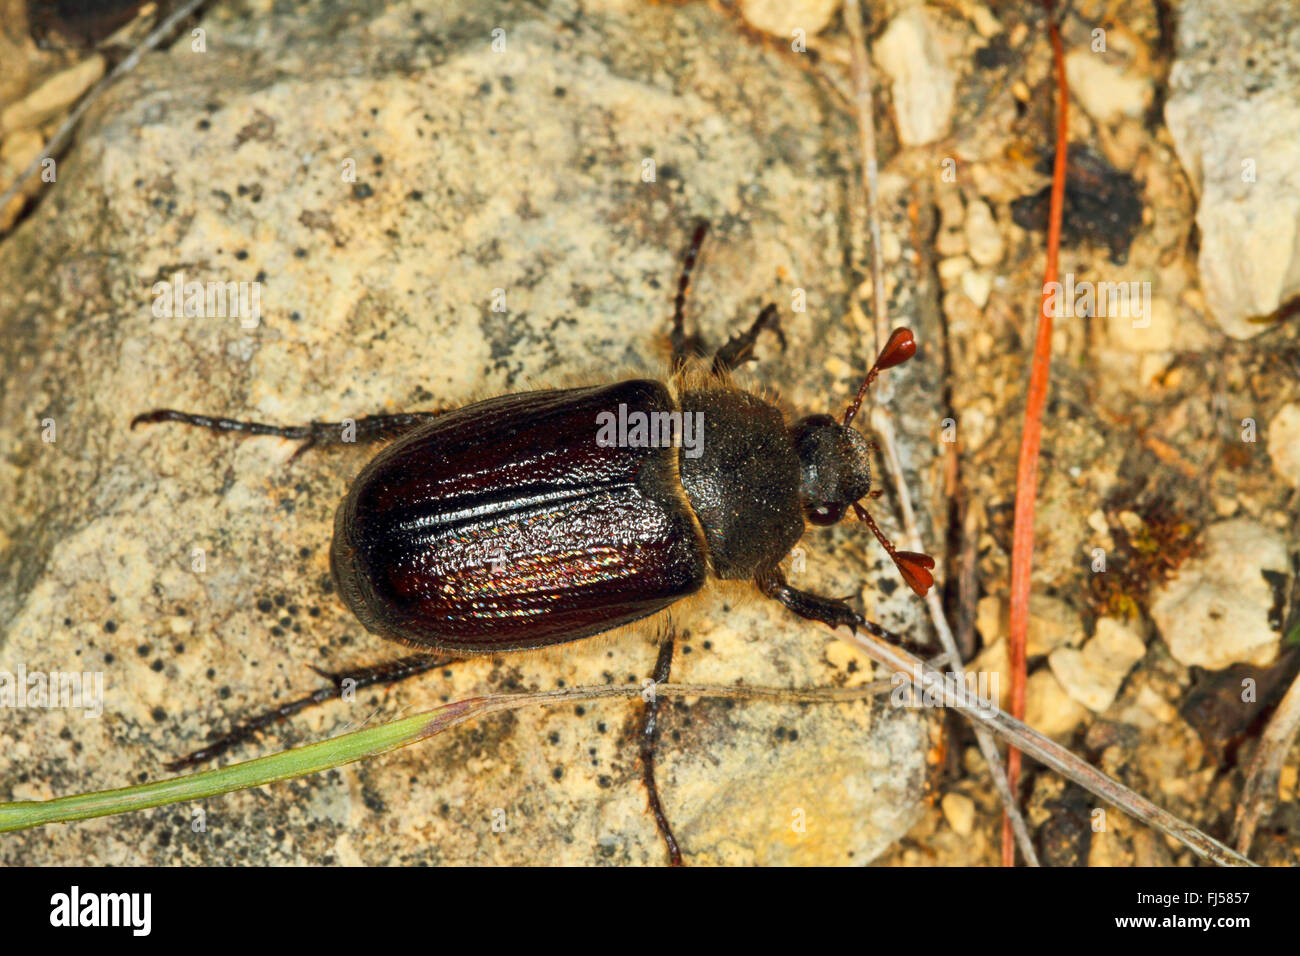 Dung beetle (Amphimallon atrum), on a stone, view from above Stock Photo